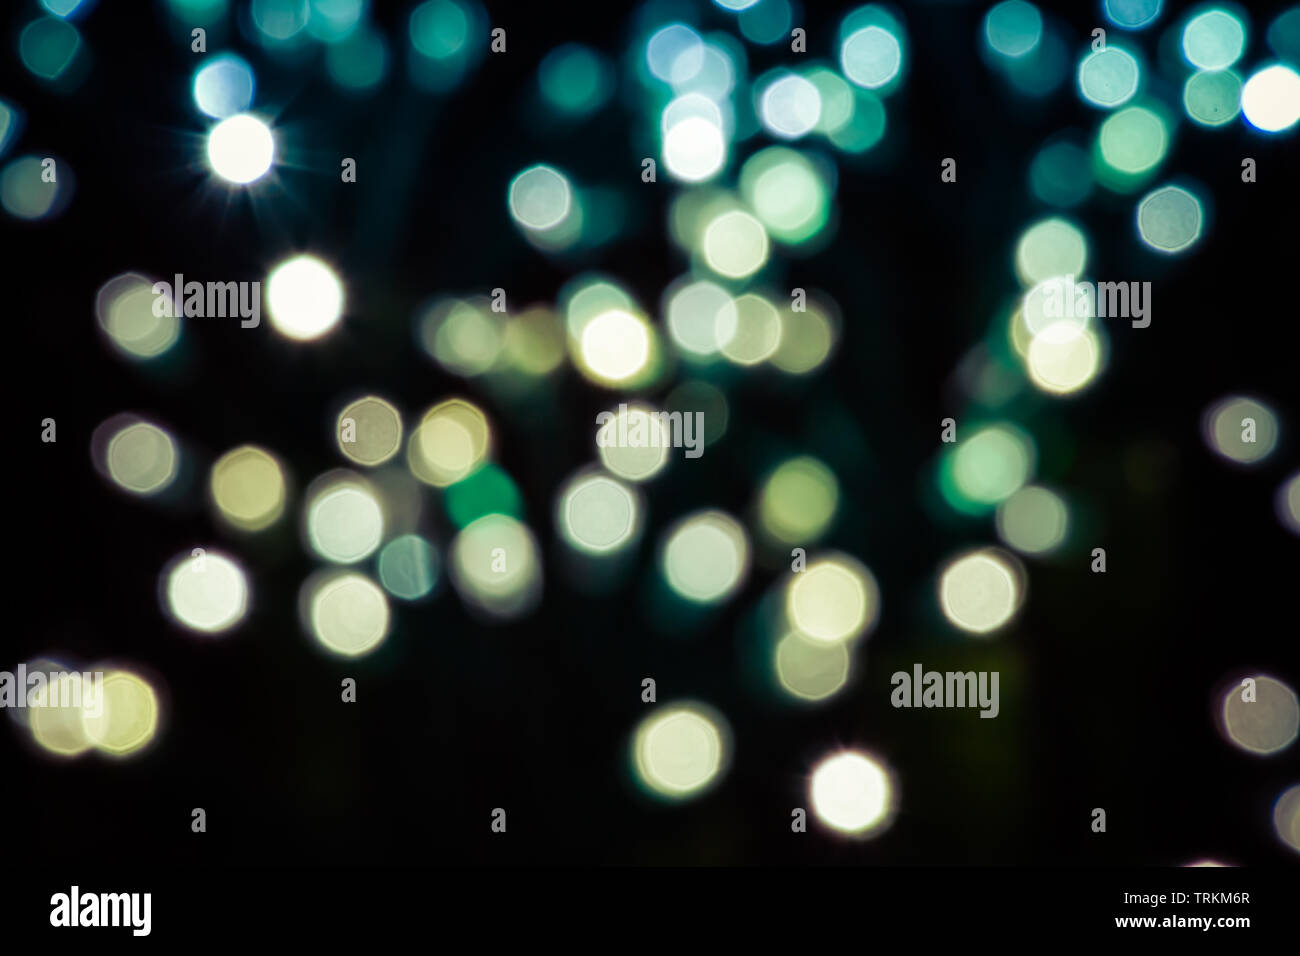 A Bokeh effect background utilizing random lights with cool tones colors  Stock Photo - Alamy